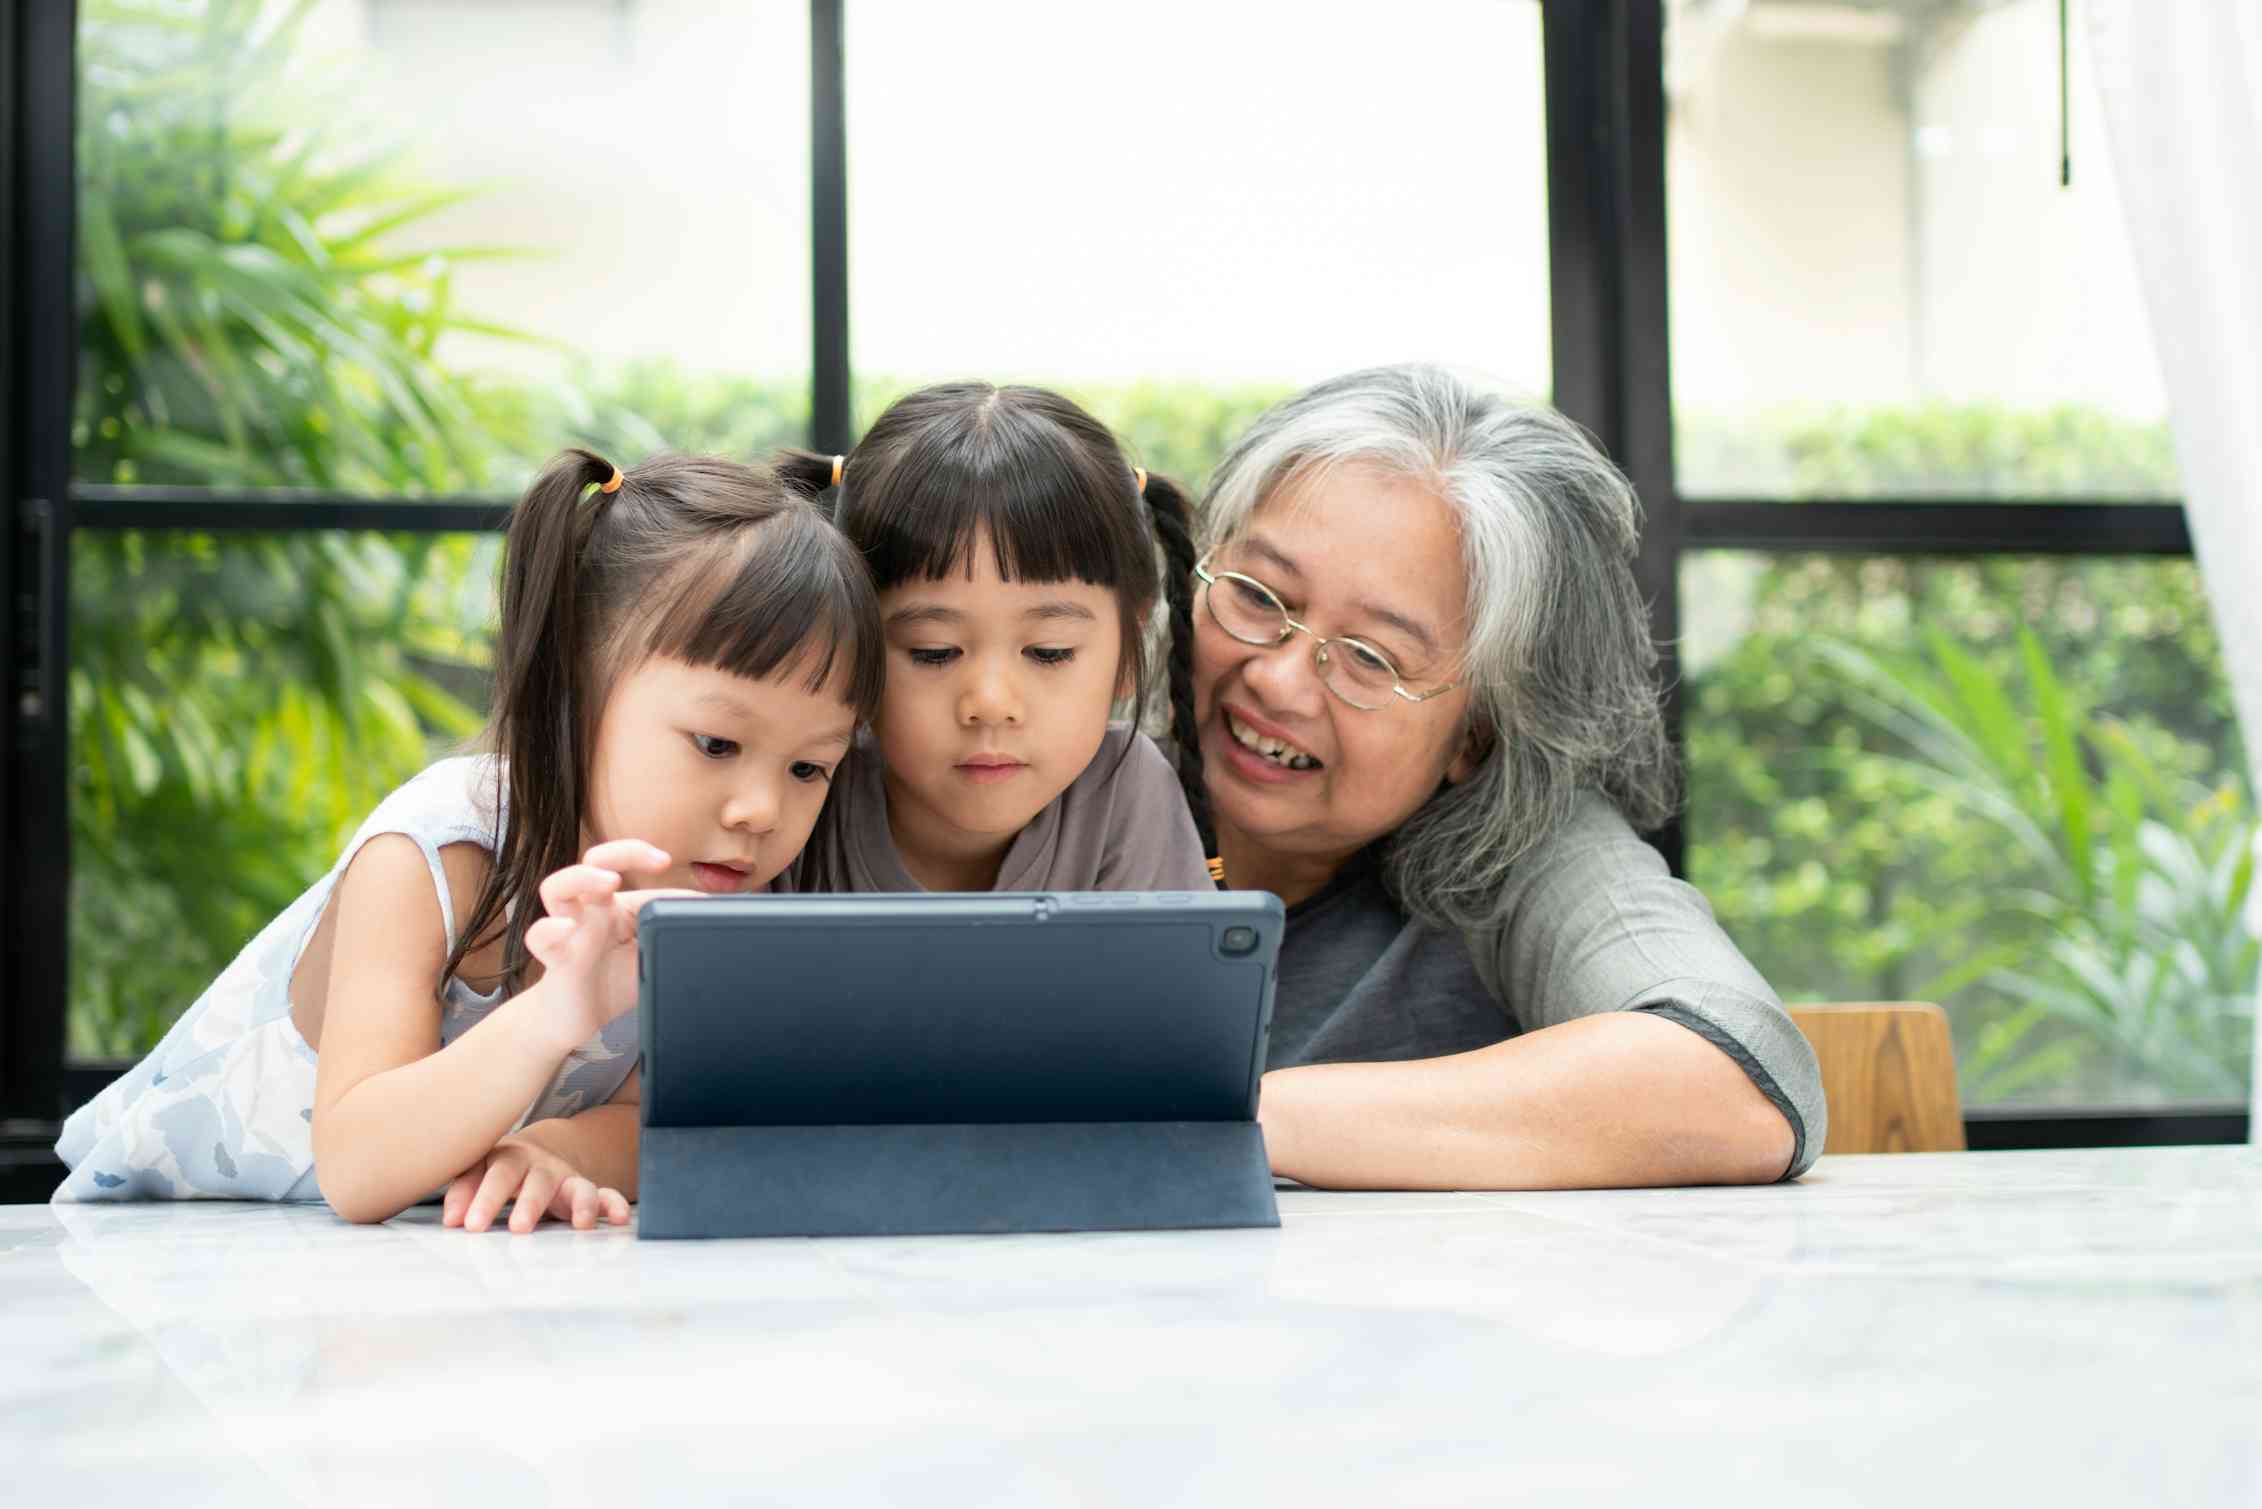 Grandmother and children playing on tablet